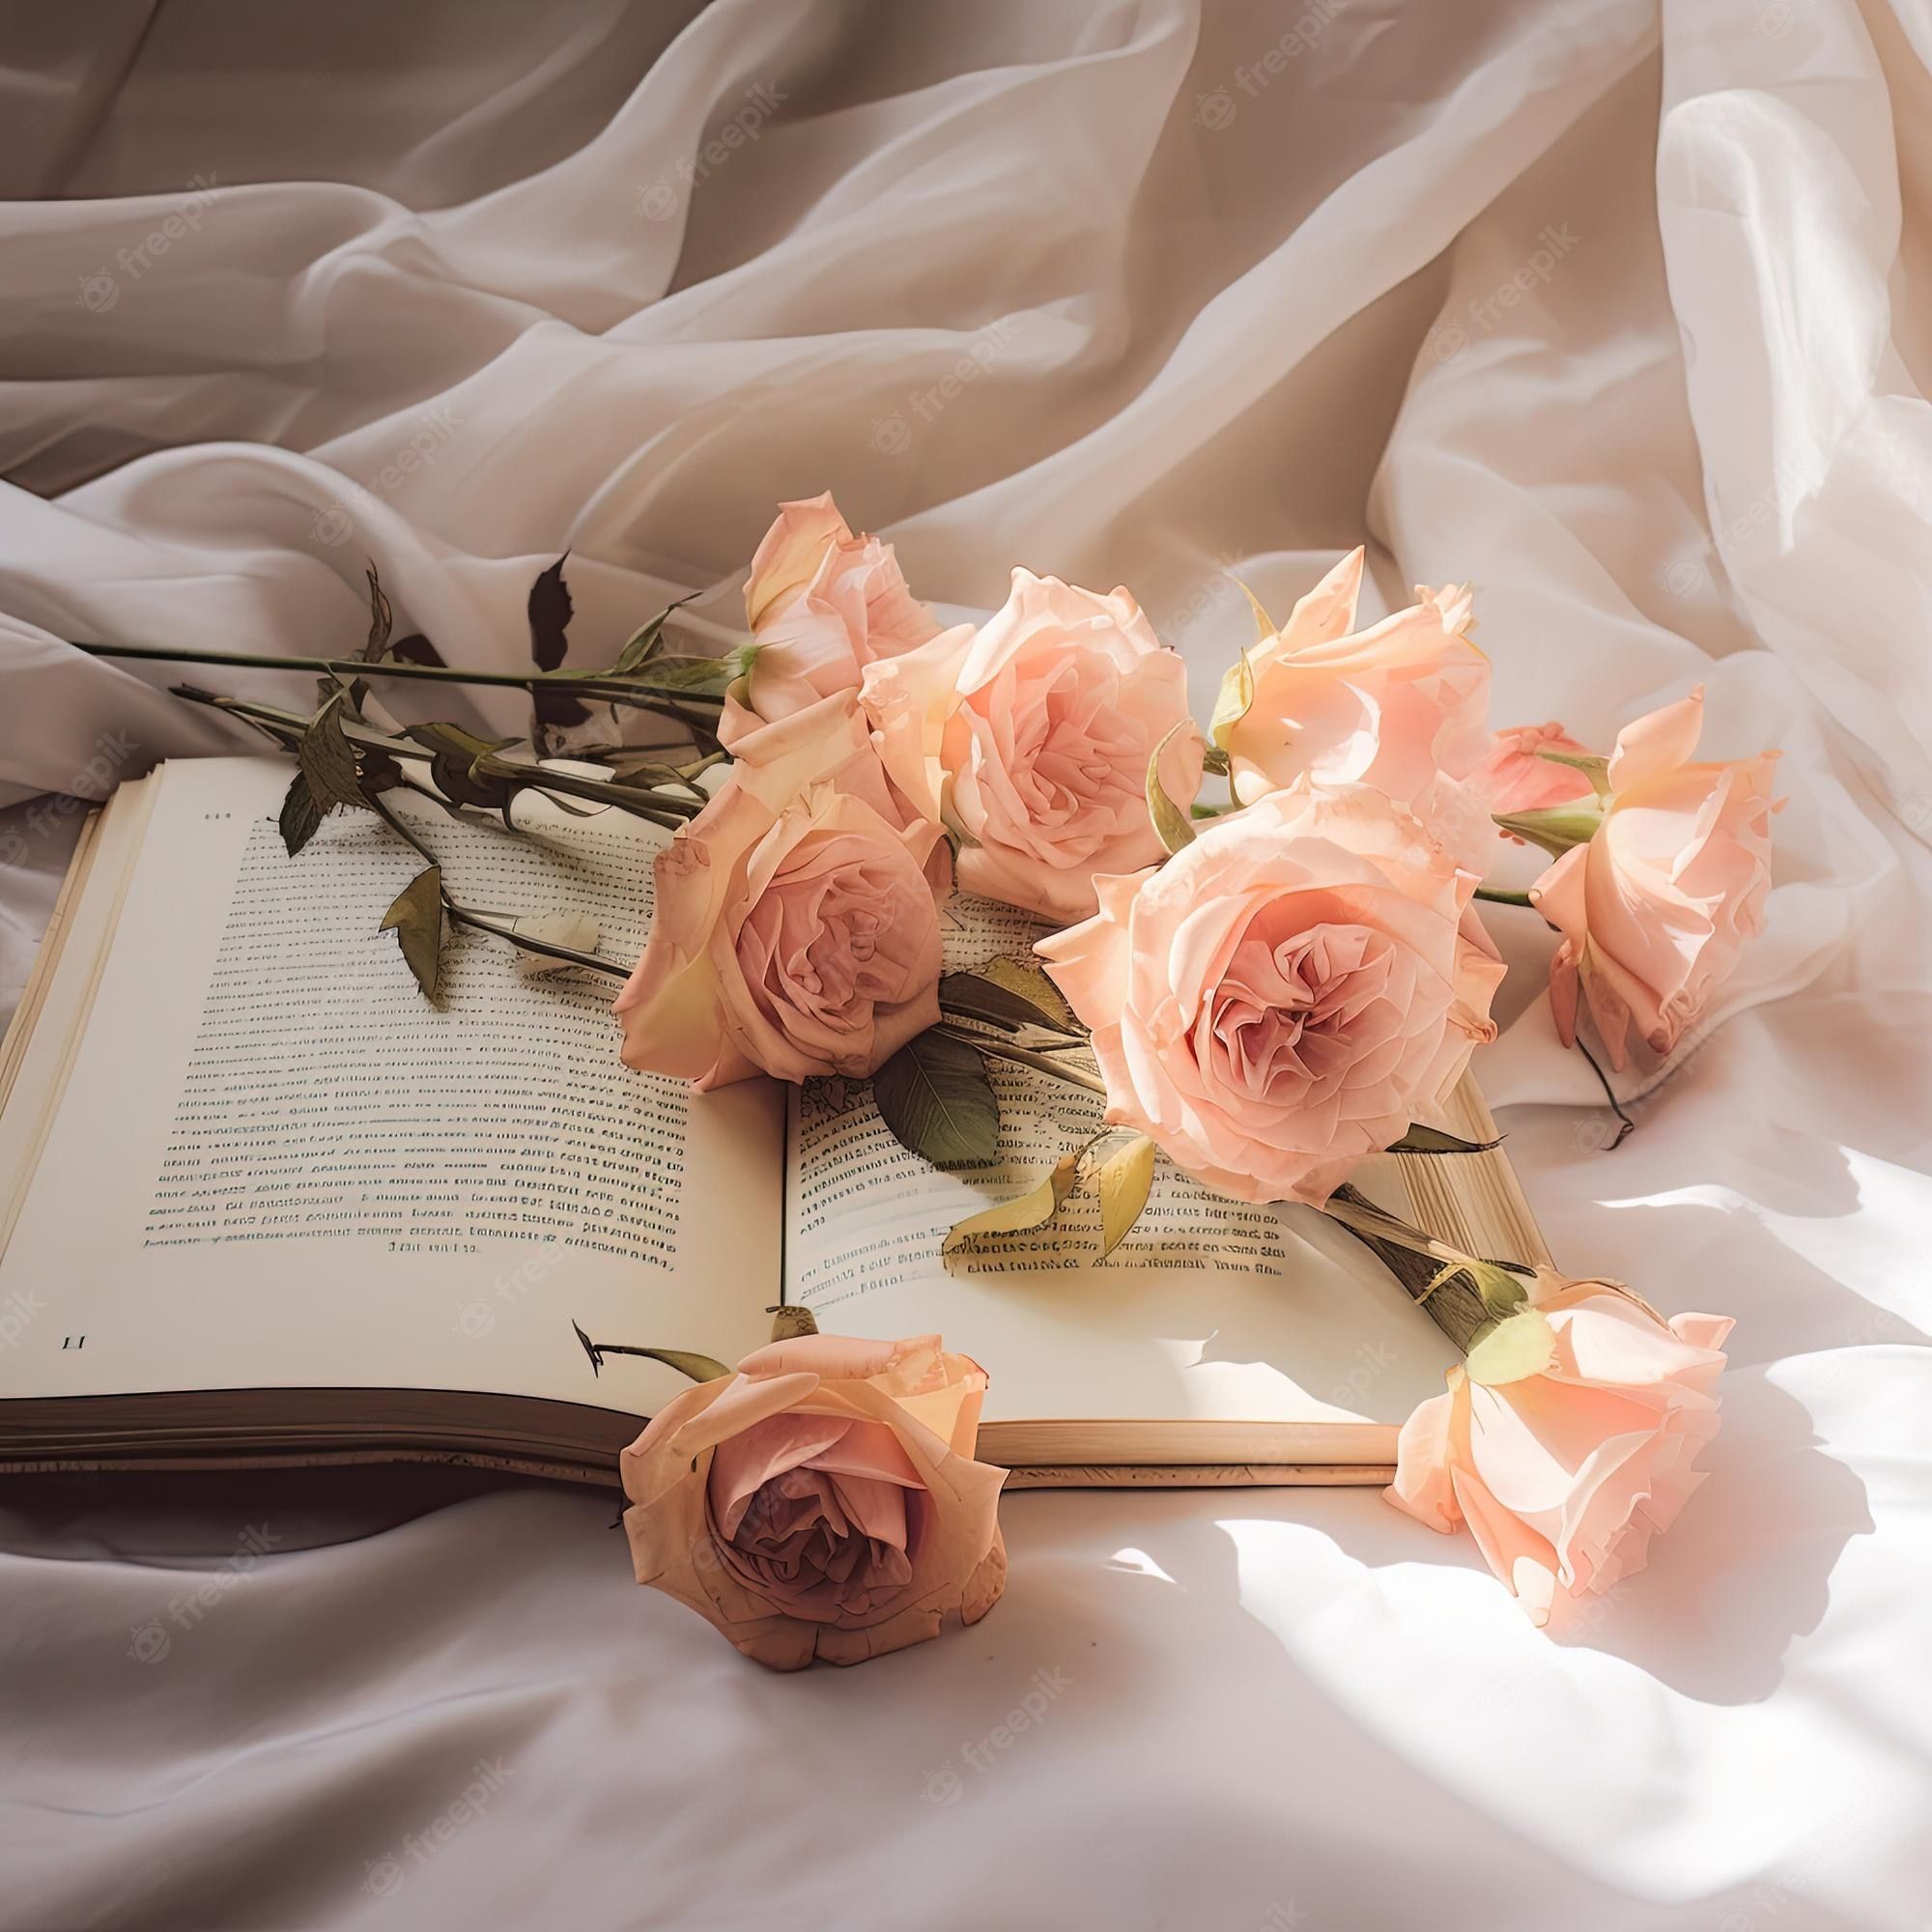 An open book with a bunch of pink roses on top of it - Books